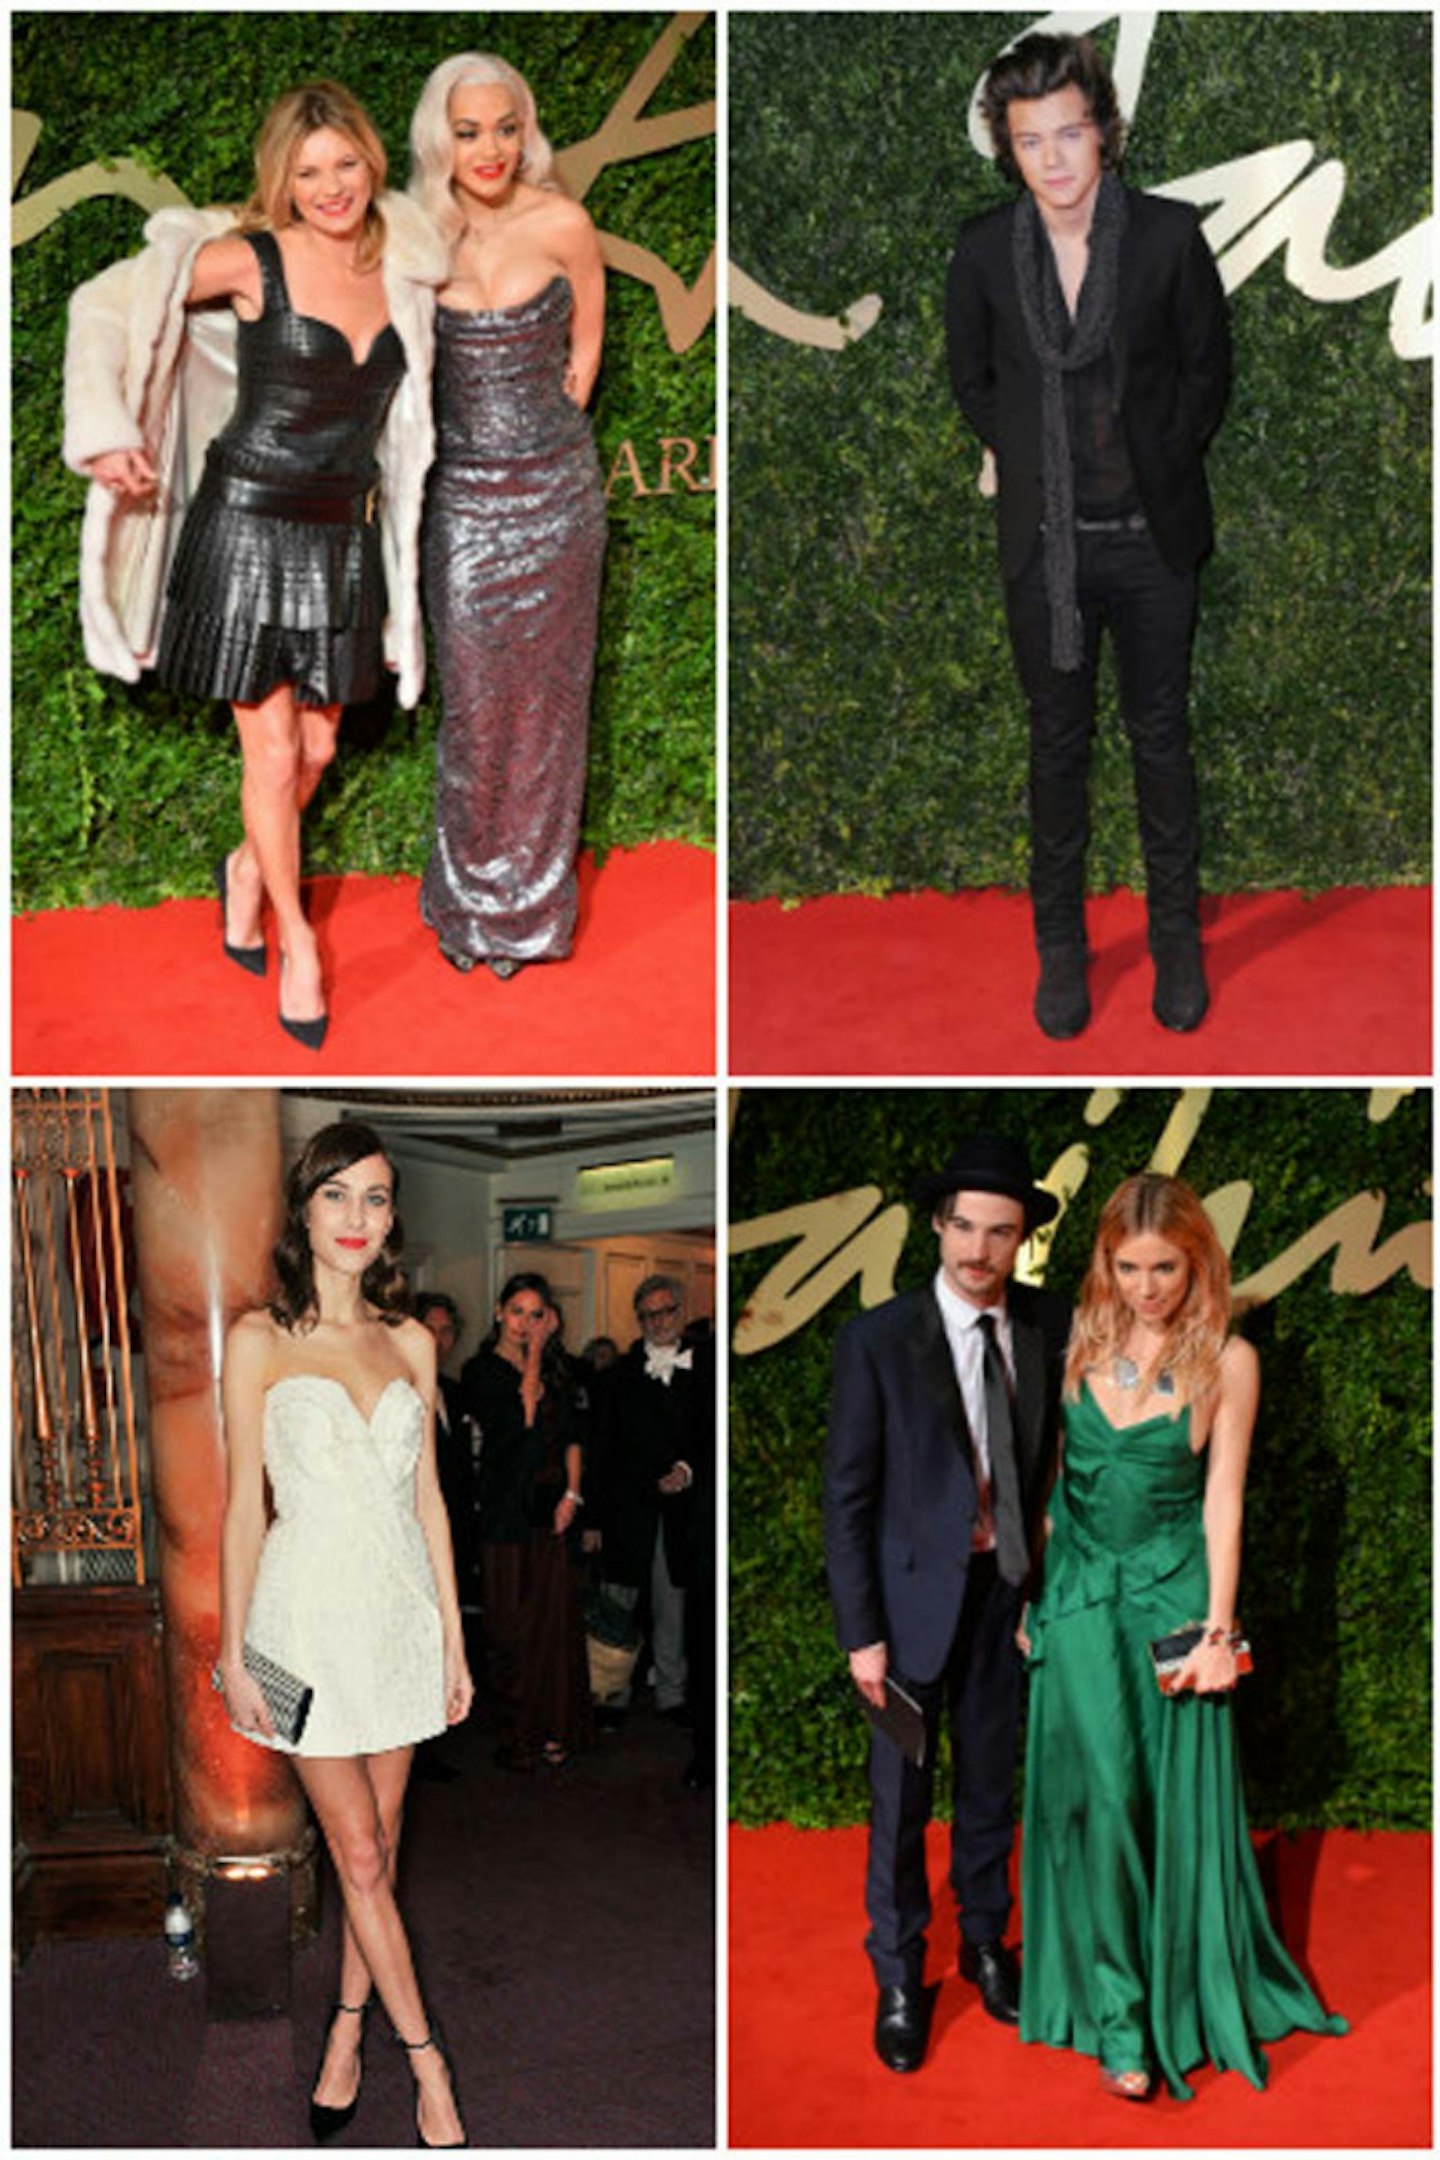 GALLERY >> Best dressed at the British Fashion Awards 2013